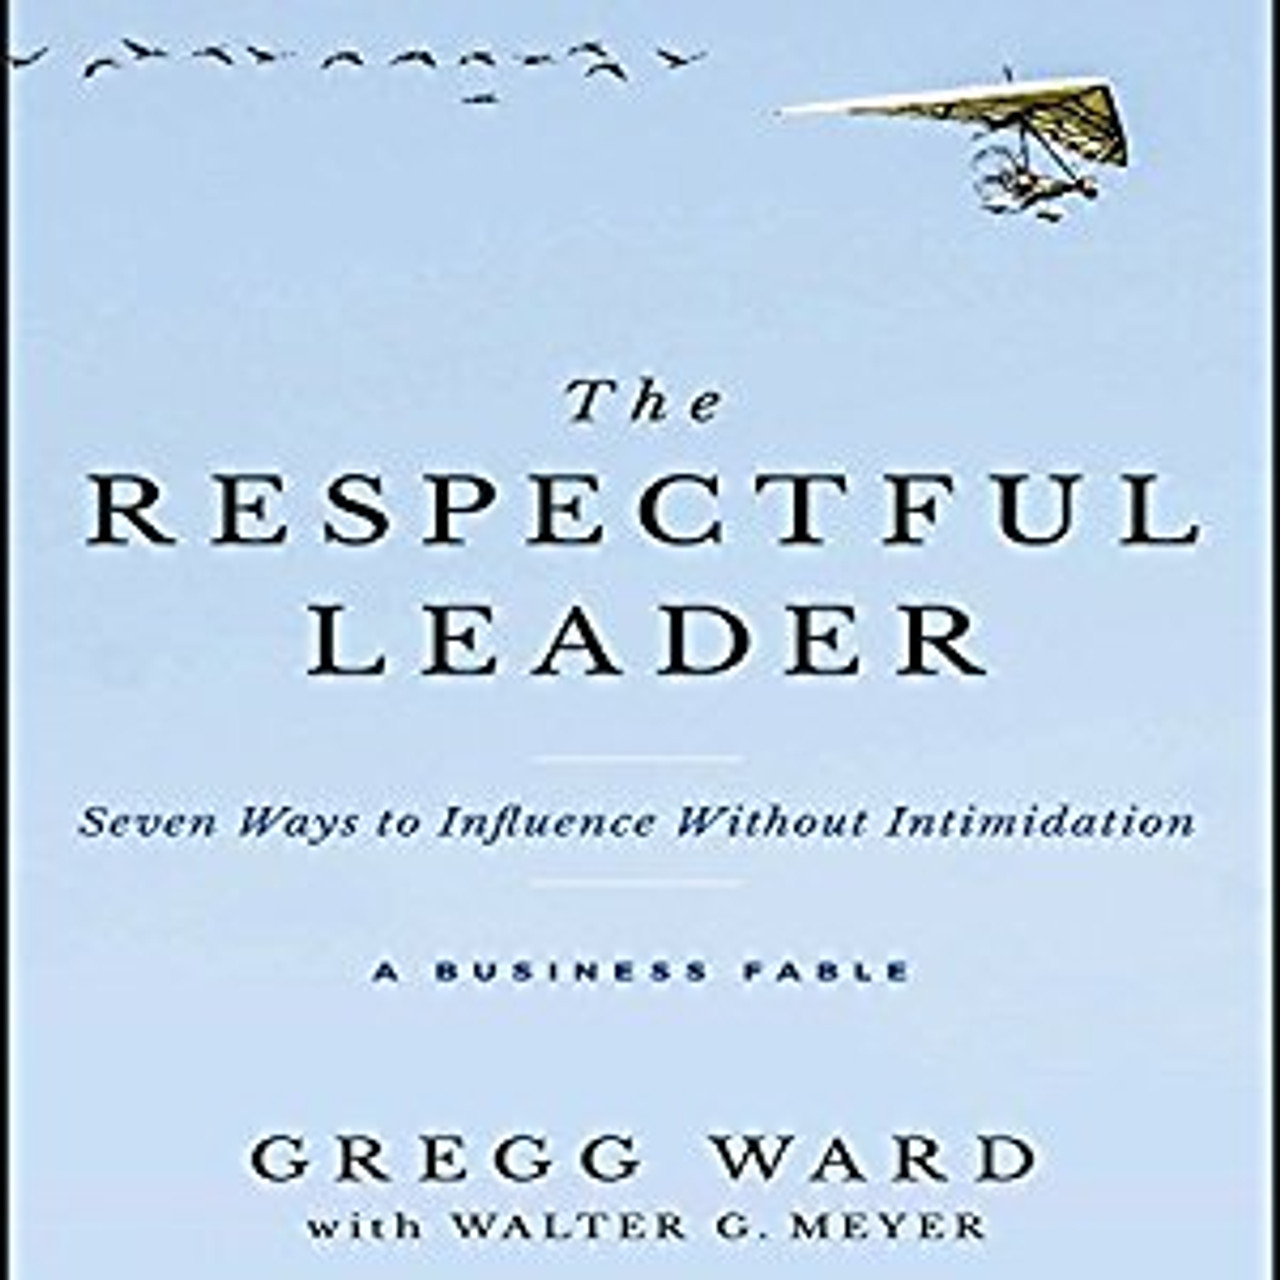 The Respectful Leader presents an engaging, thought-provoking lesson for companies seeking off-the-charts performance. Author Gregg Ward draws on 25 years of leadership consulting, coaching and training experience to reveal the secret to great results: respect. In this true-to-life business fable, he shares the story of Des Hogan, a CEO who discovers that disrespectful behavior on the part of his leadership team is eating away at his company's morale, productivity, and profits. At a loss for a solution, he meets Grace--a straight-shooting, self-described "little old lady" in the maintenance department. With her no-nonsense advice, he sets out to revamp the culture and turn his company around; but first, he has to turn inward and realize that his own behavior sets the tone for the company at every level. This enlightening, engaging and honest story will help you recognize and analyze your own behaviors and interactions, and show you how to create a winning culture based on leading with respect.